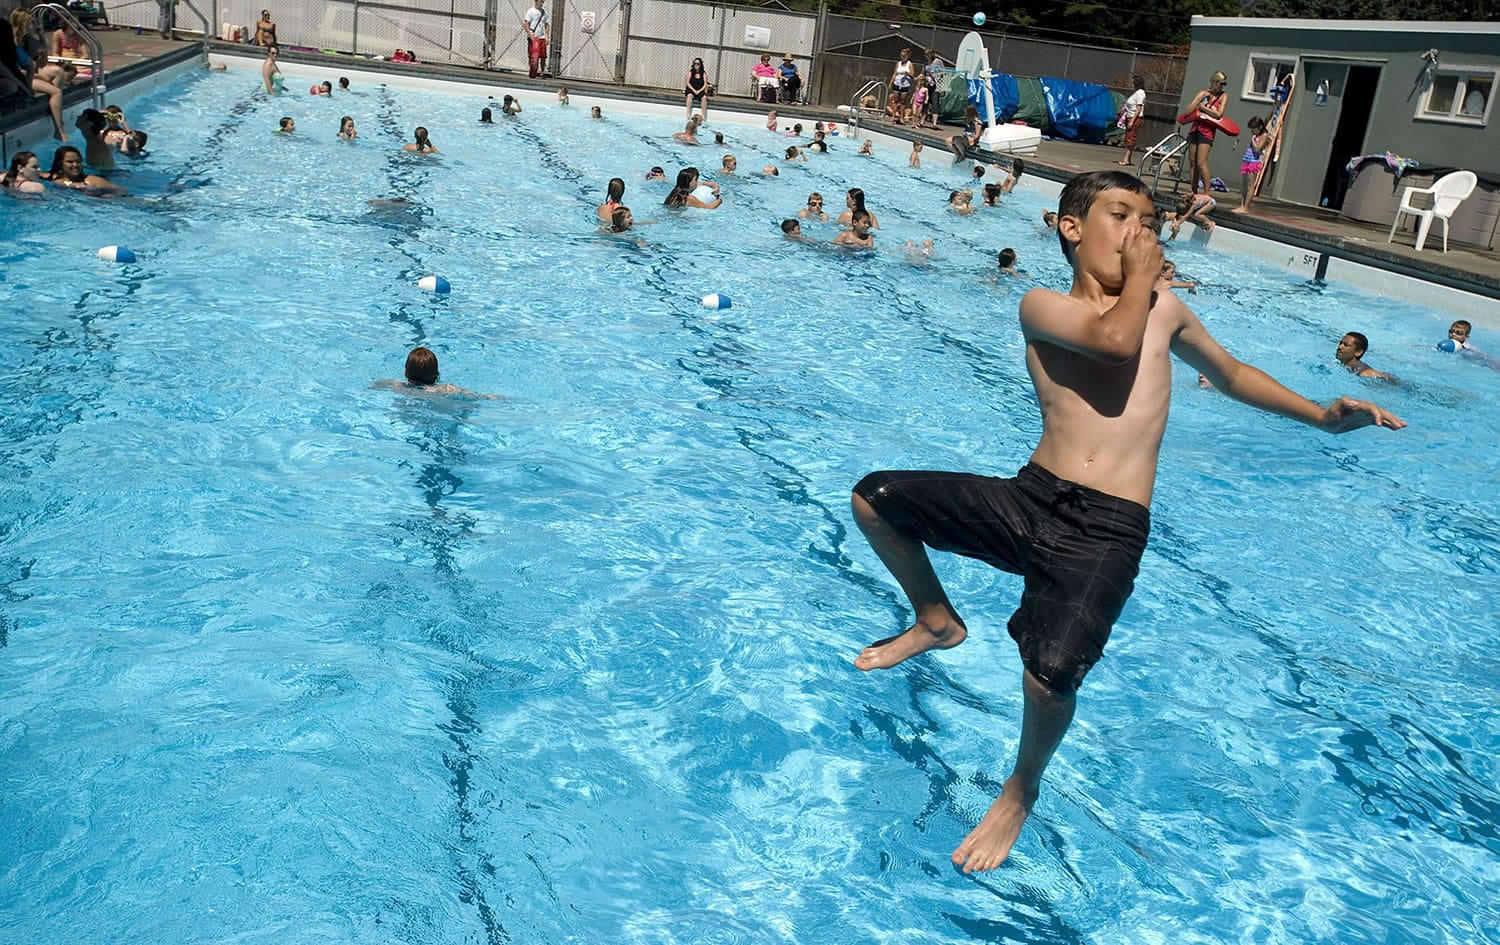 Clark County has several public pools available for budding swimmers.